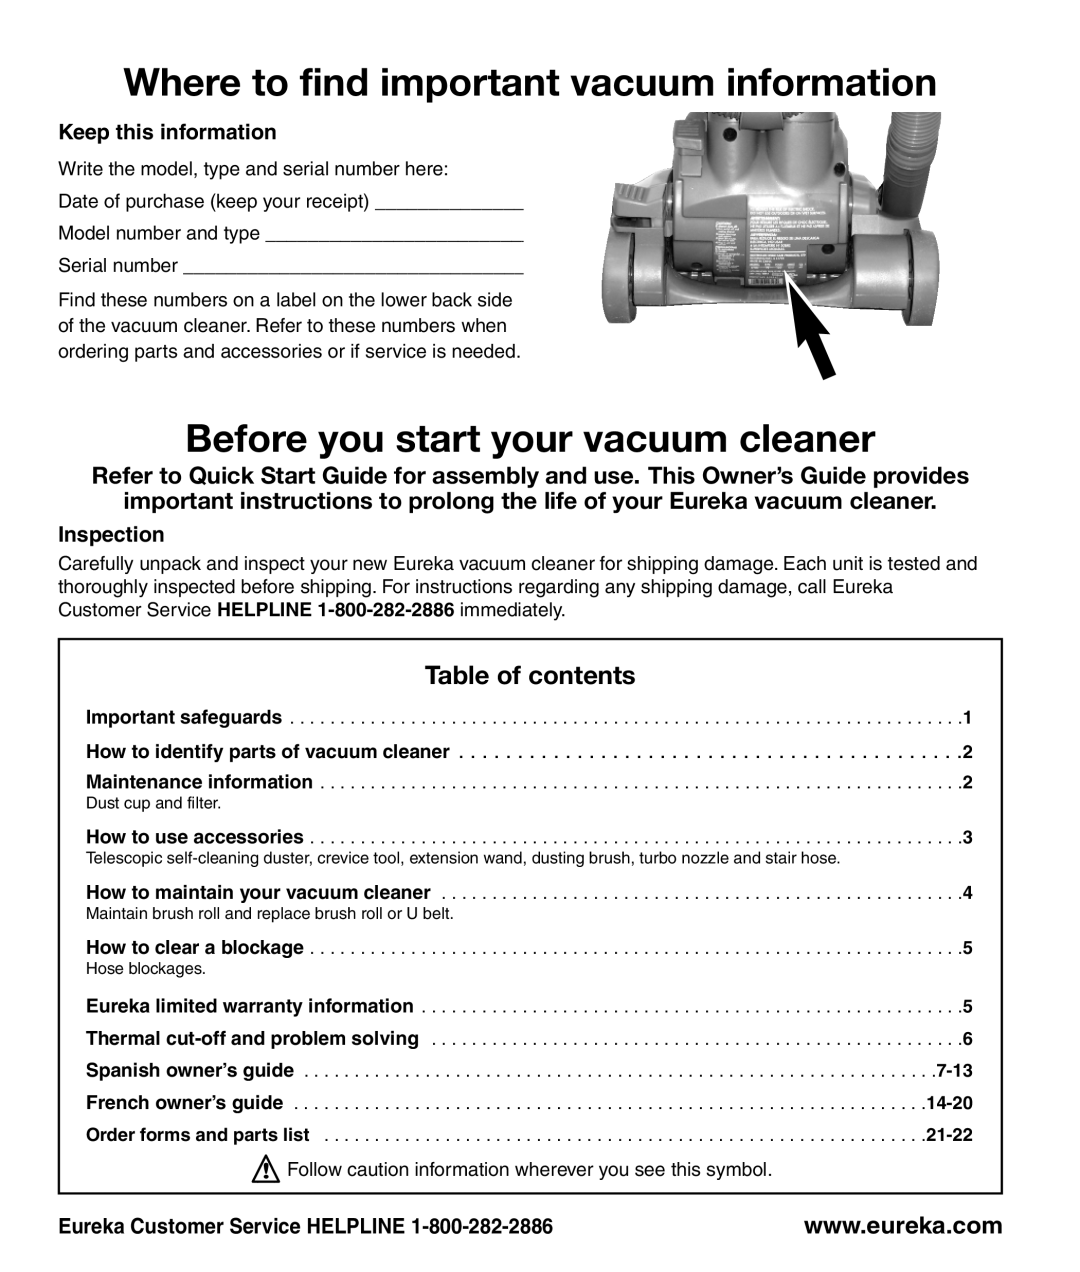 Eureka 4770 manual Where to find important vacuum information, Before you start your vacuum cleaner, Keep this information 